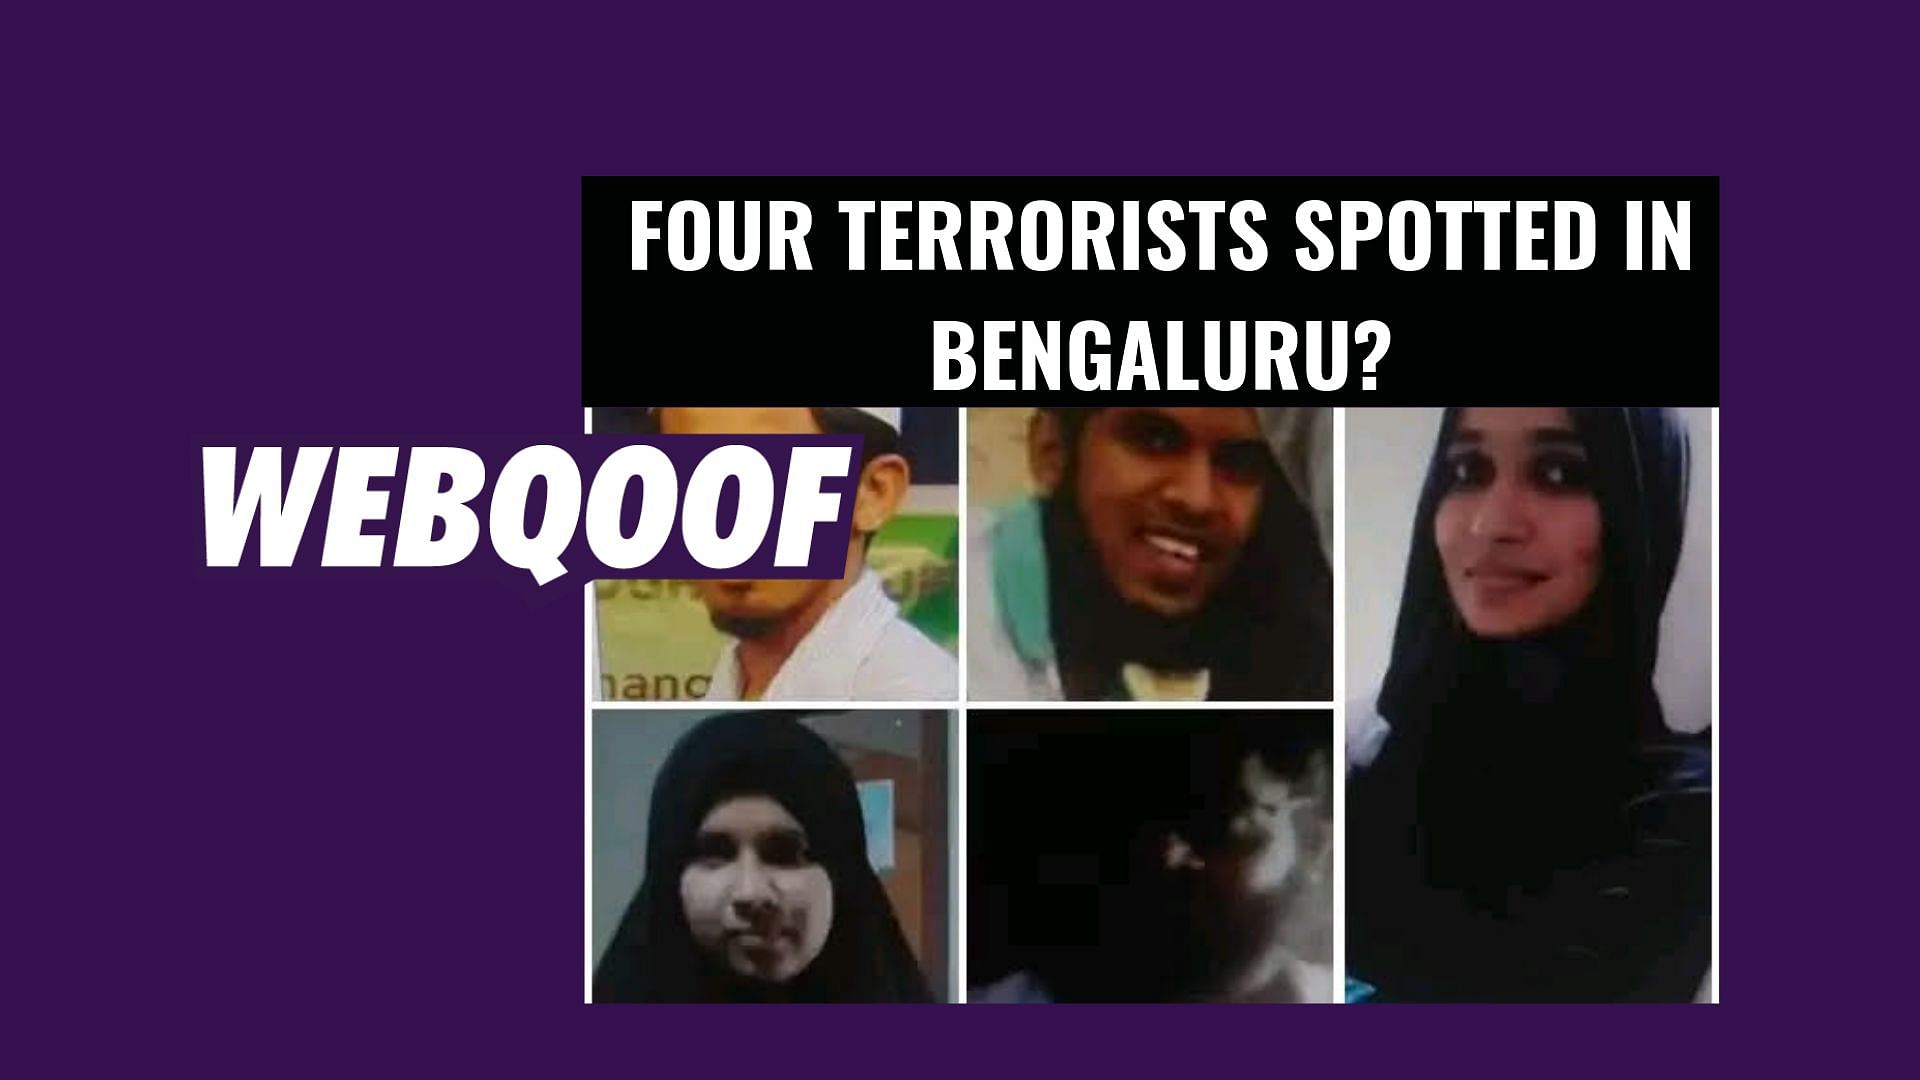 A viral message falsely claims that four terrorists were spotted in Bengaluru.